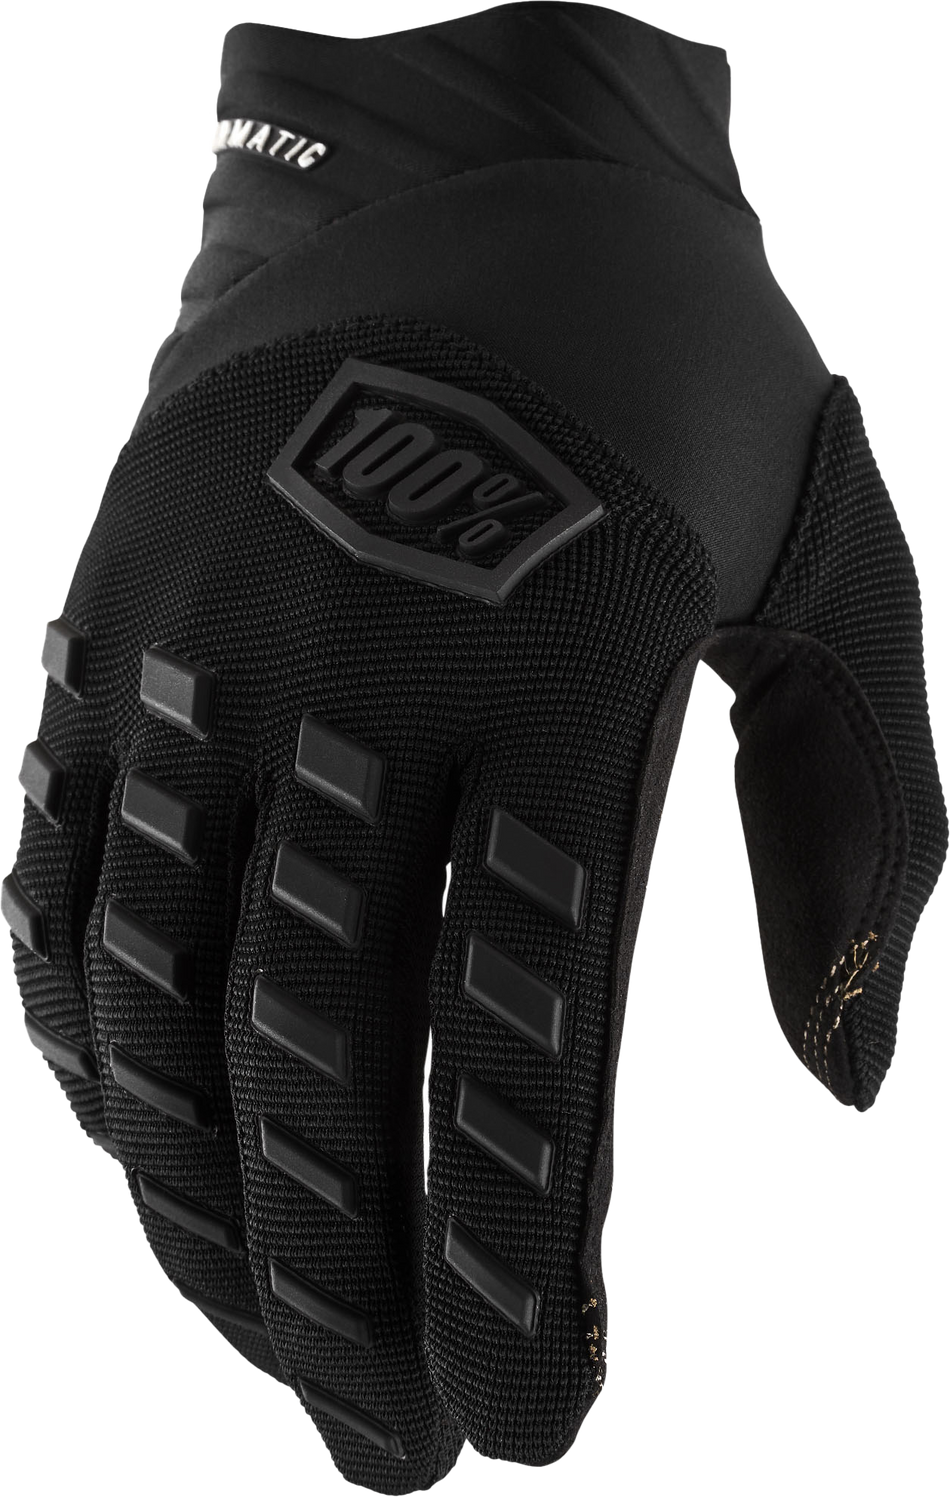 100% Airmatic Youth Gloves Black/Charcoal Sm 10001-00000